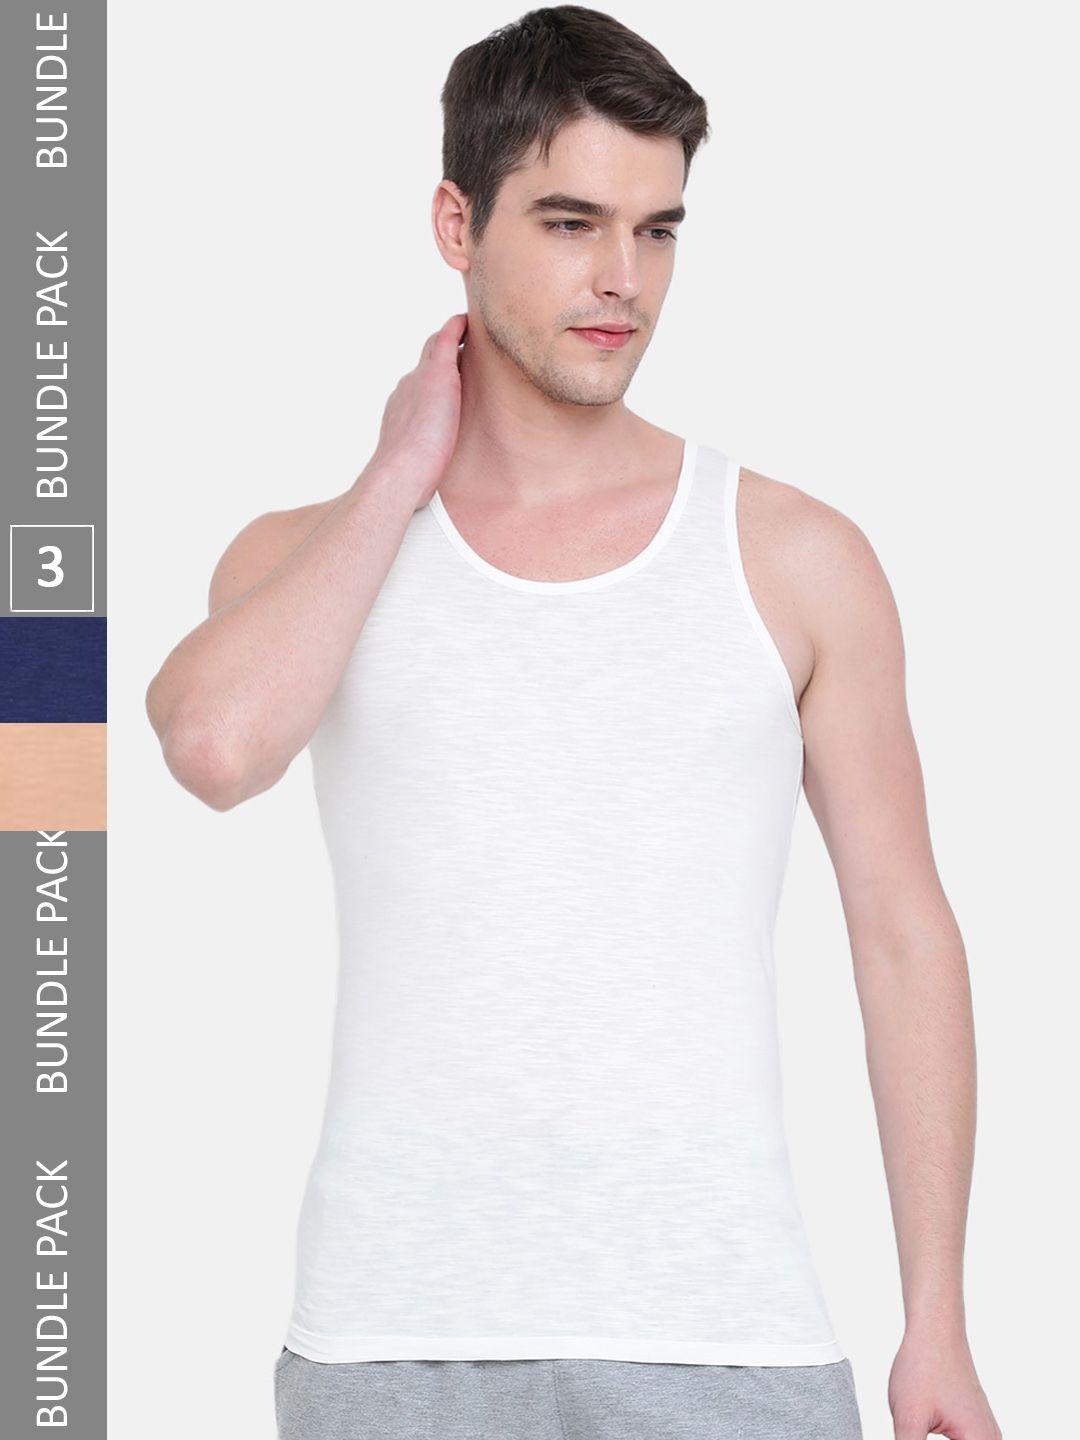 almo wear men pack of 3 sleeveless cotton basic vests